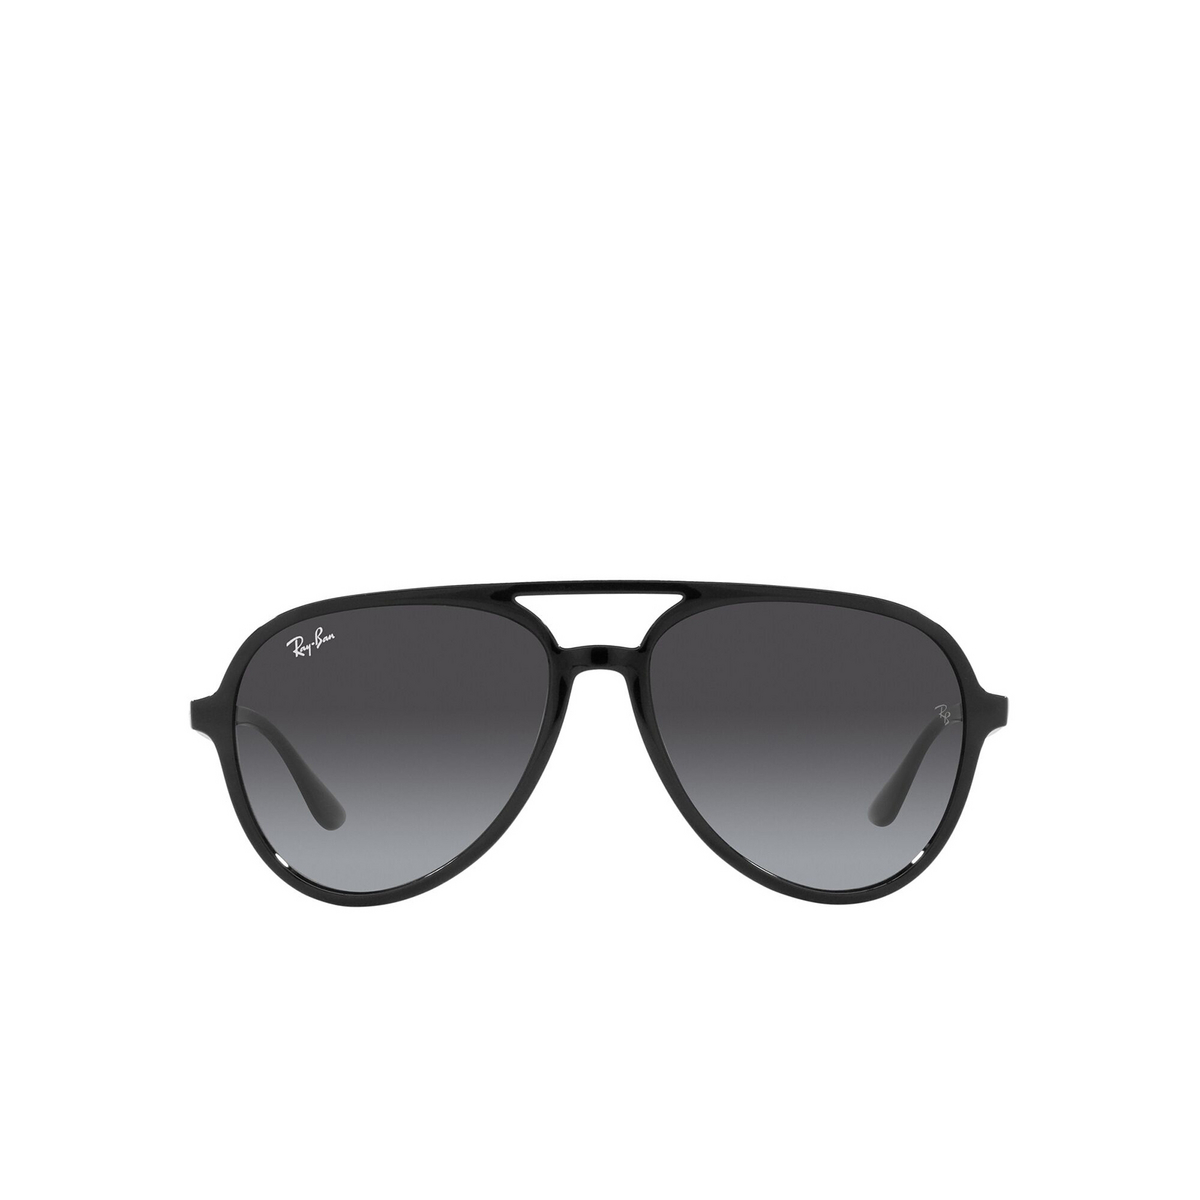 Ray-Ban RB4376 Sunglasses 601/8G Black - front view